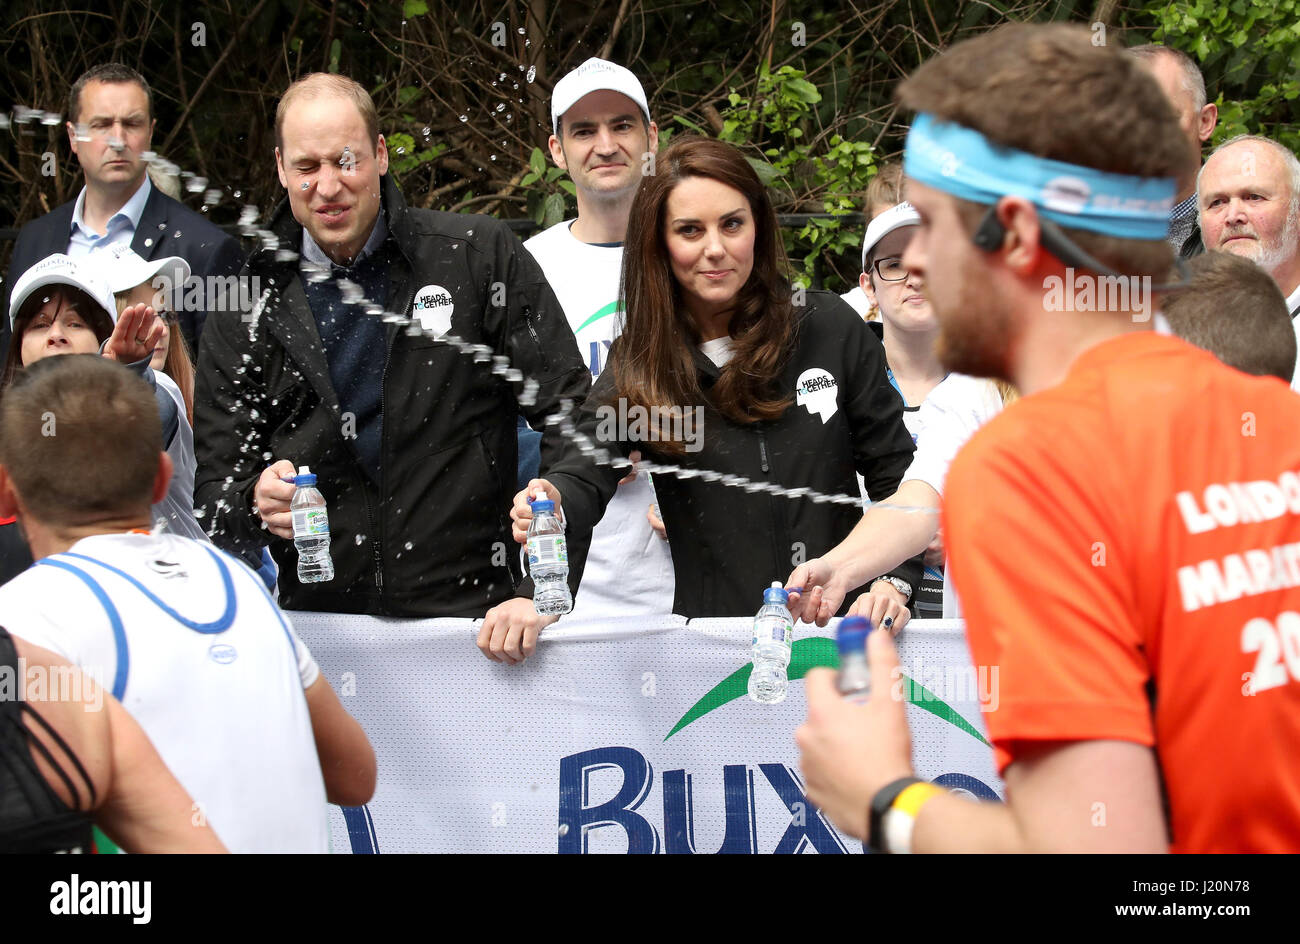 A runner squirts water as the Duke and Duchess of Cambridge hands out water to runners during the 2017 Virgin Money London Marathon. Stock Photo